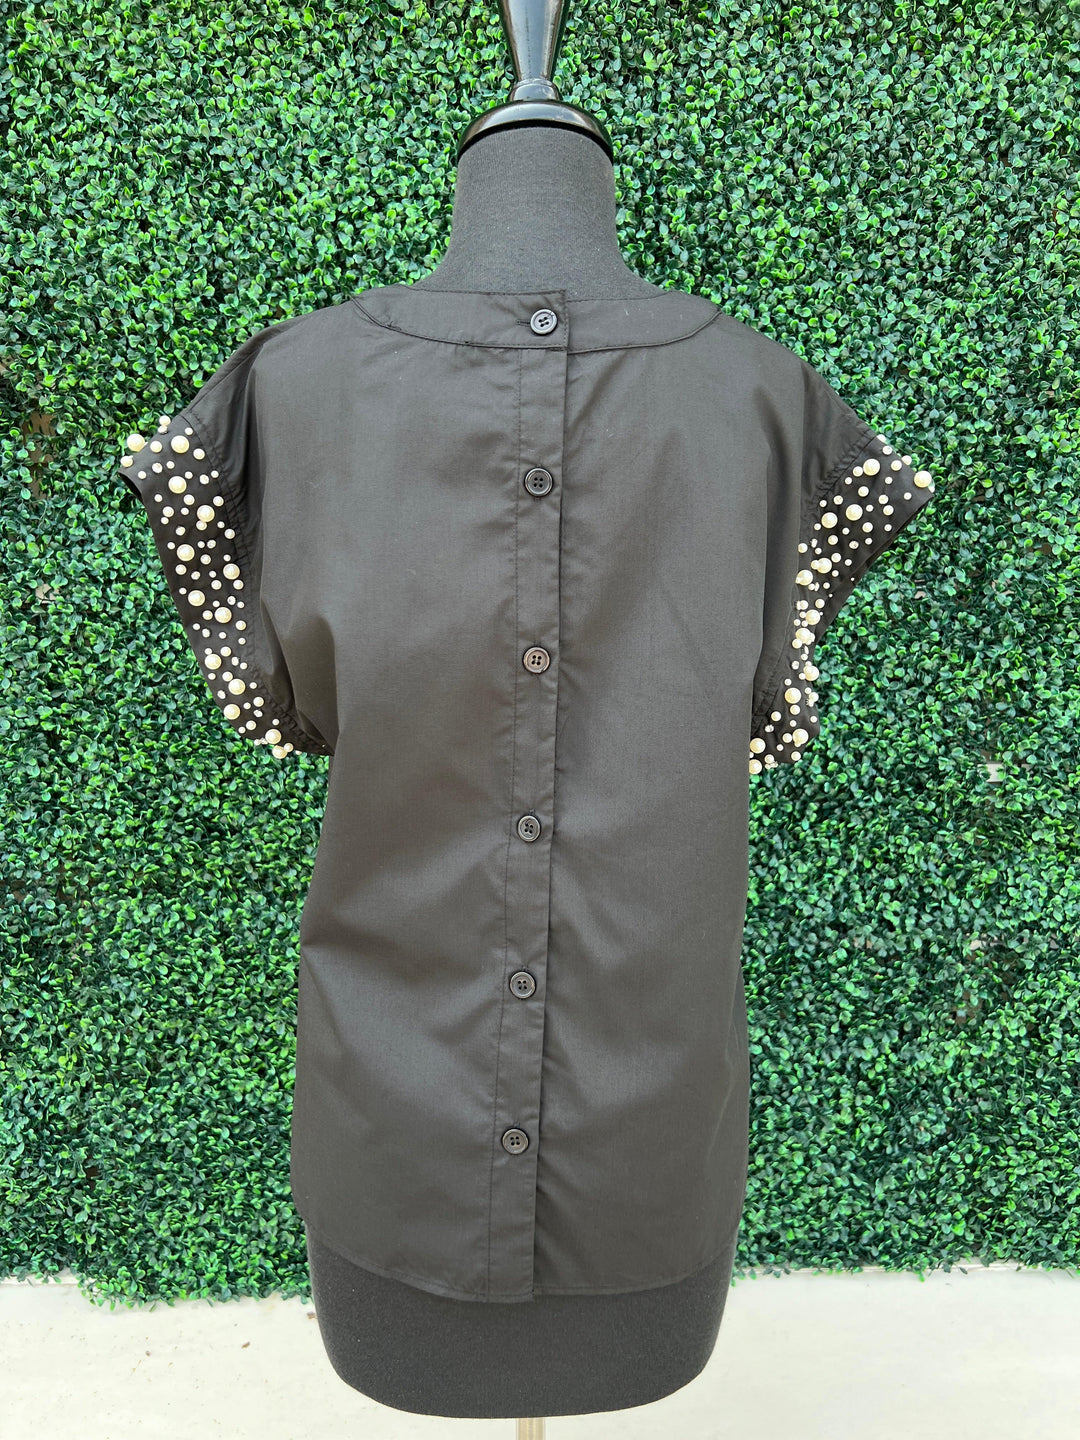 Pearl Embellished Cotton Top black with buttons entro brand online boutique houston texas